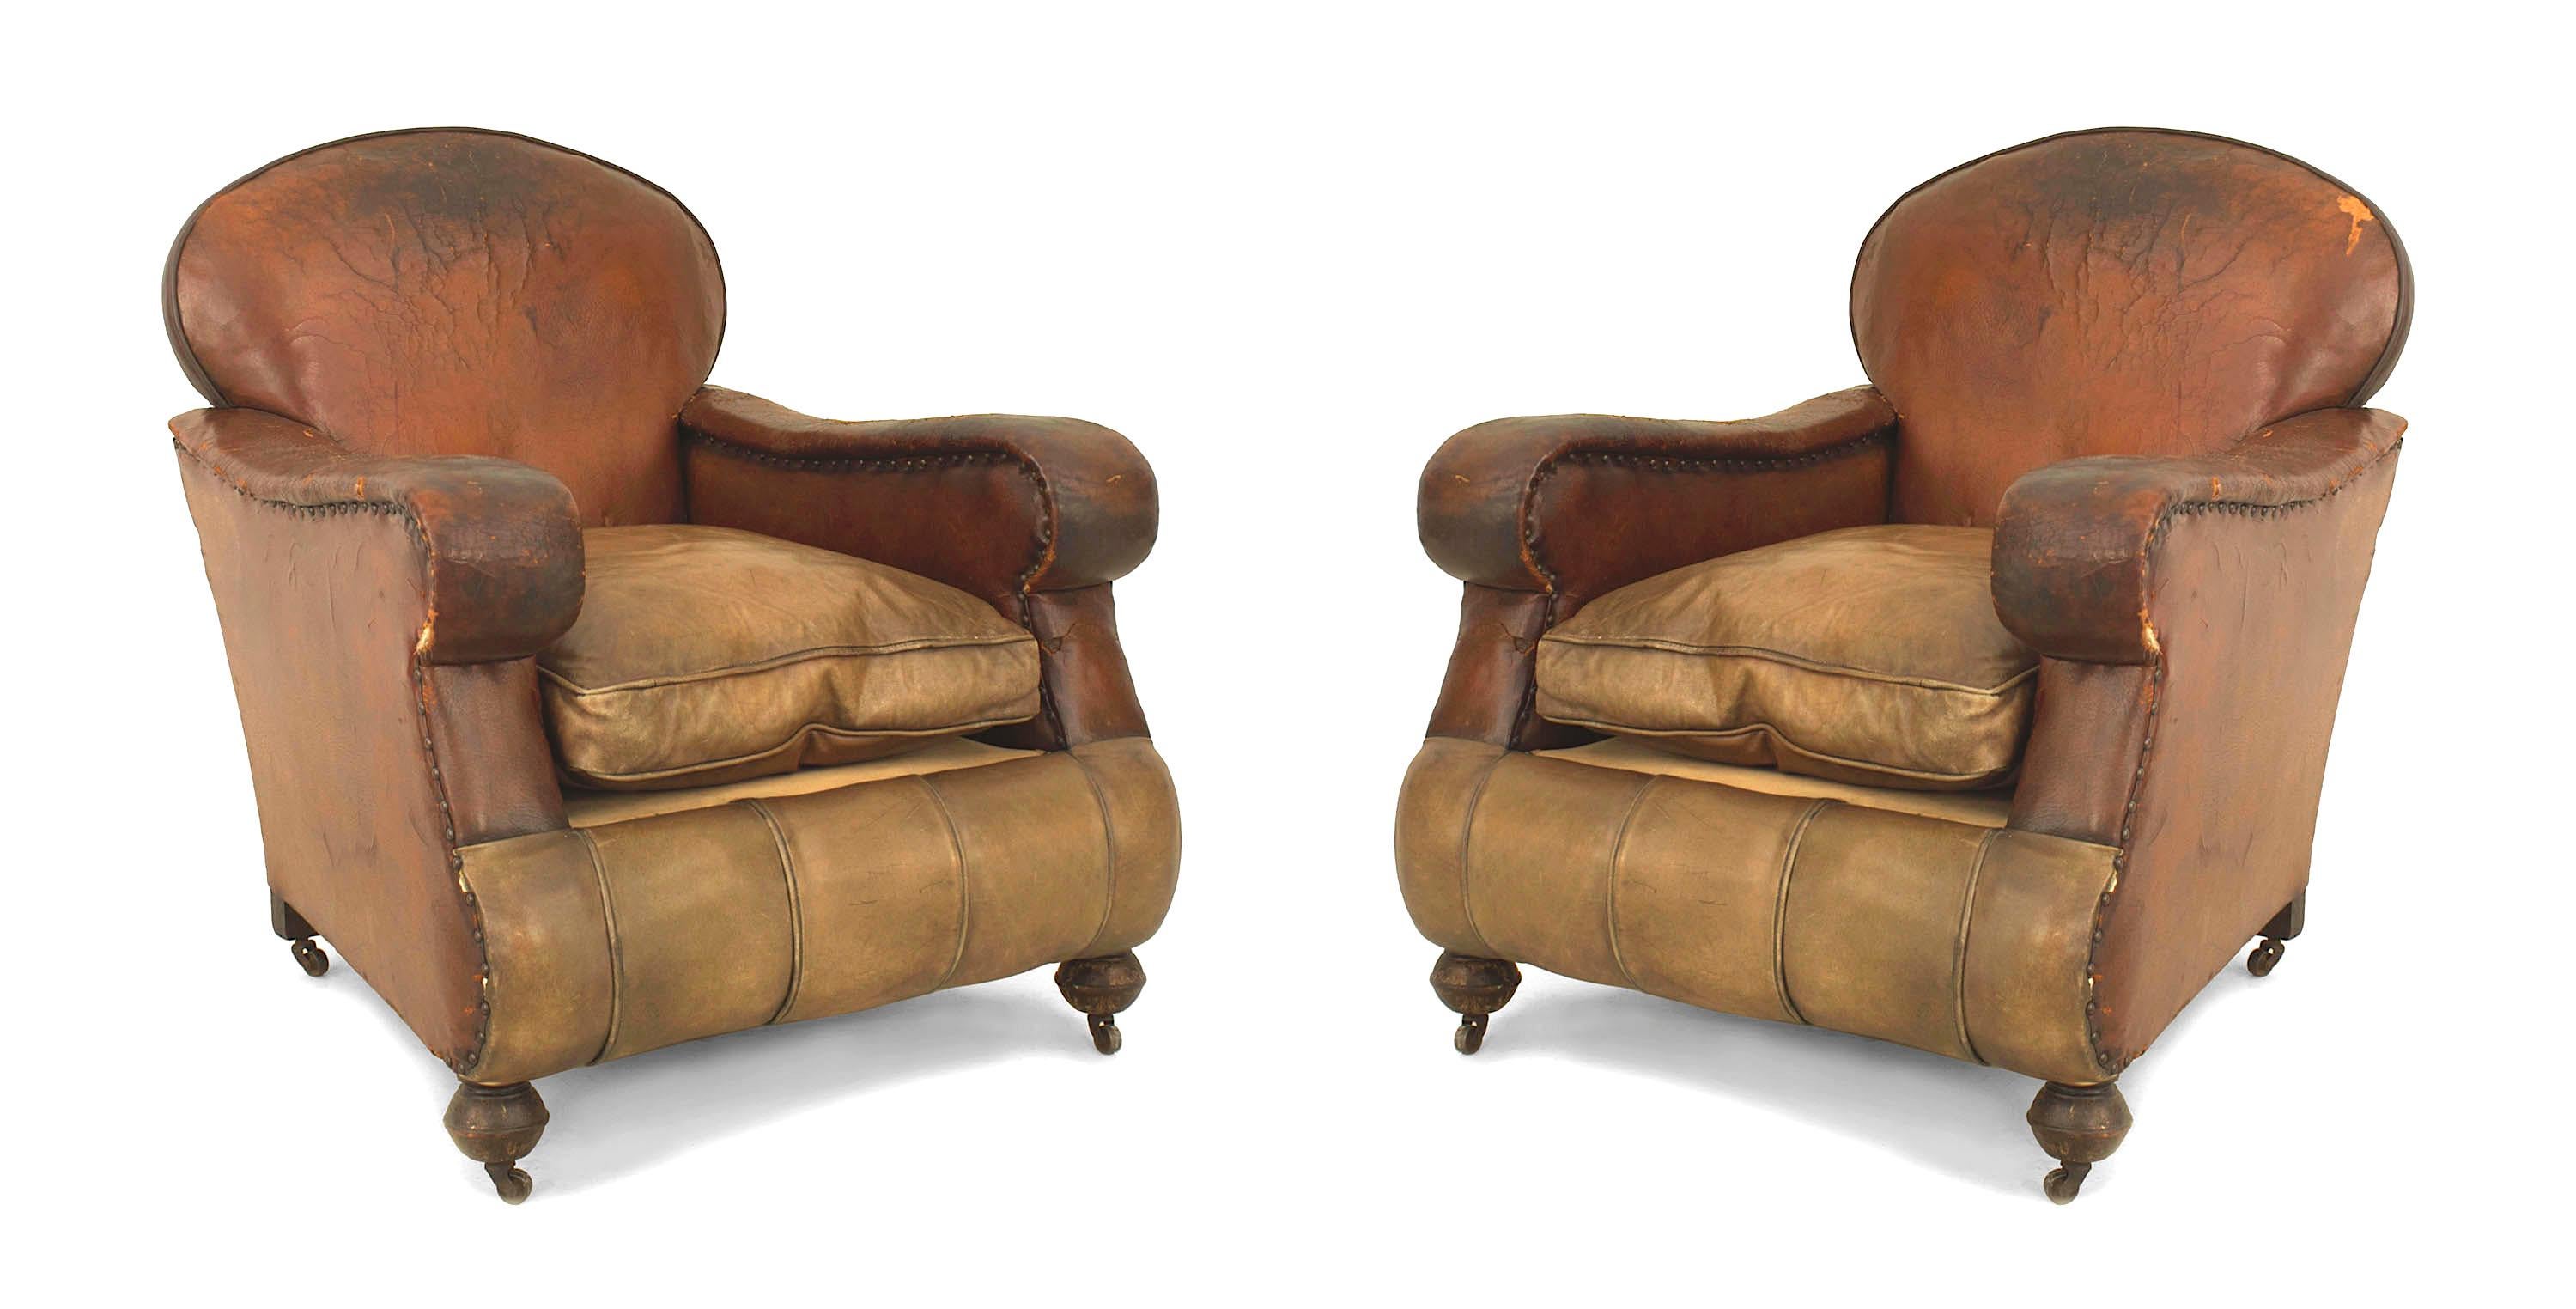 Pair of English Victorian over size brown leather club chairs with a cushion seat and rounded back (condition of leather AS IS).